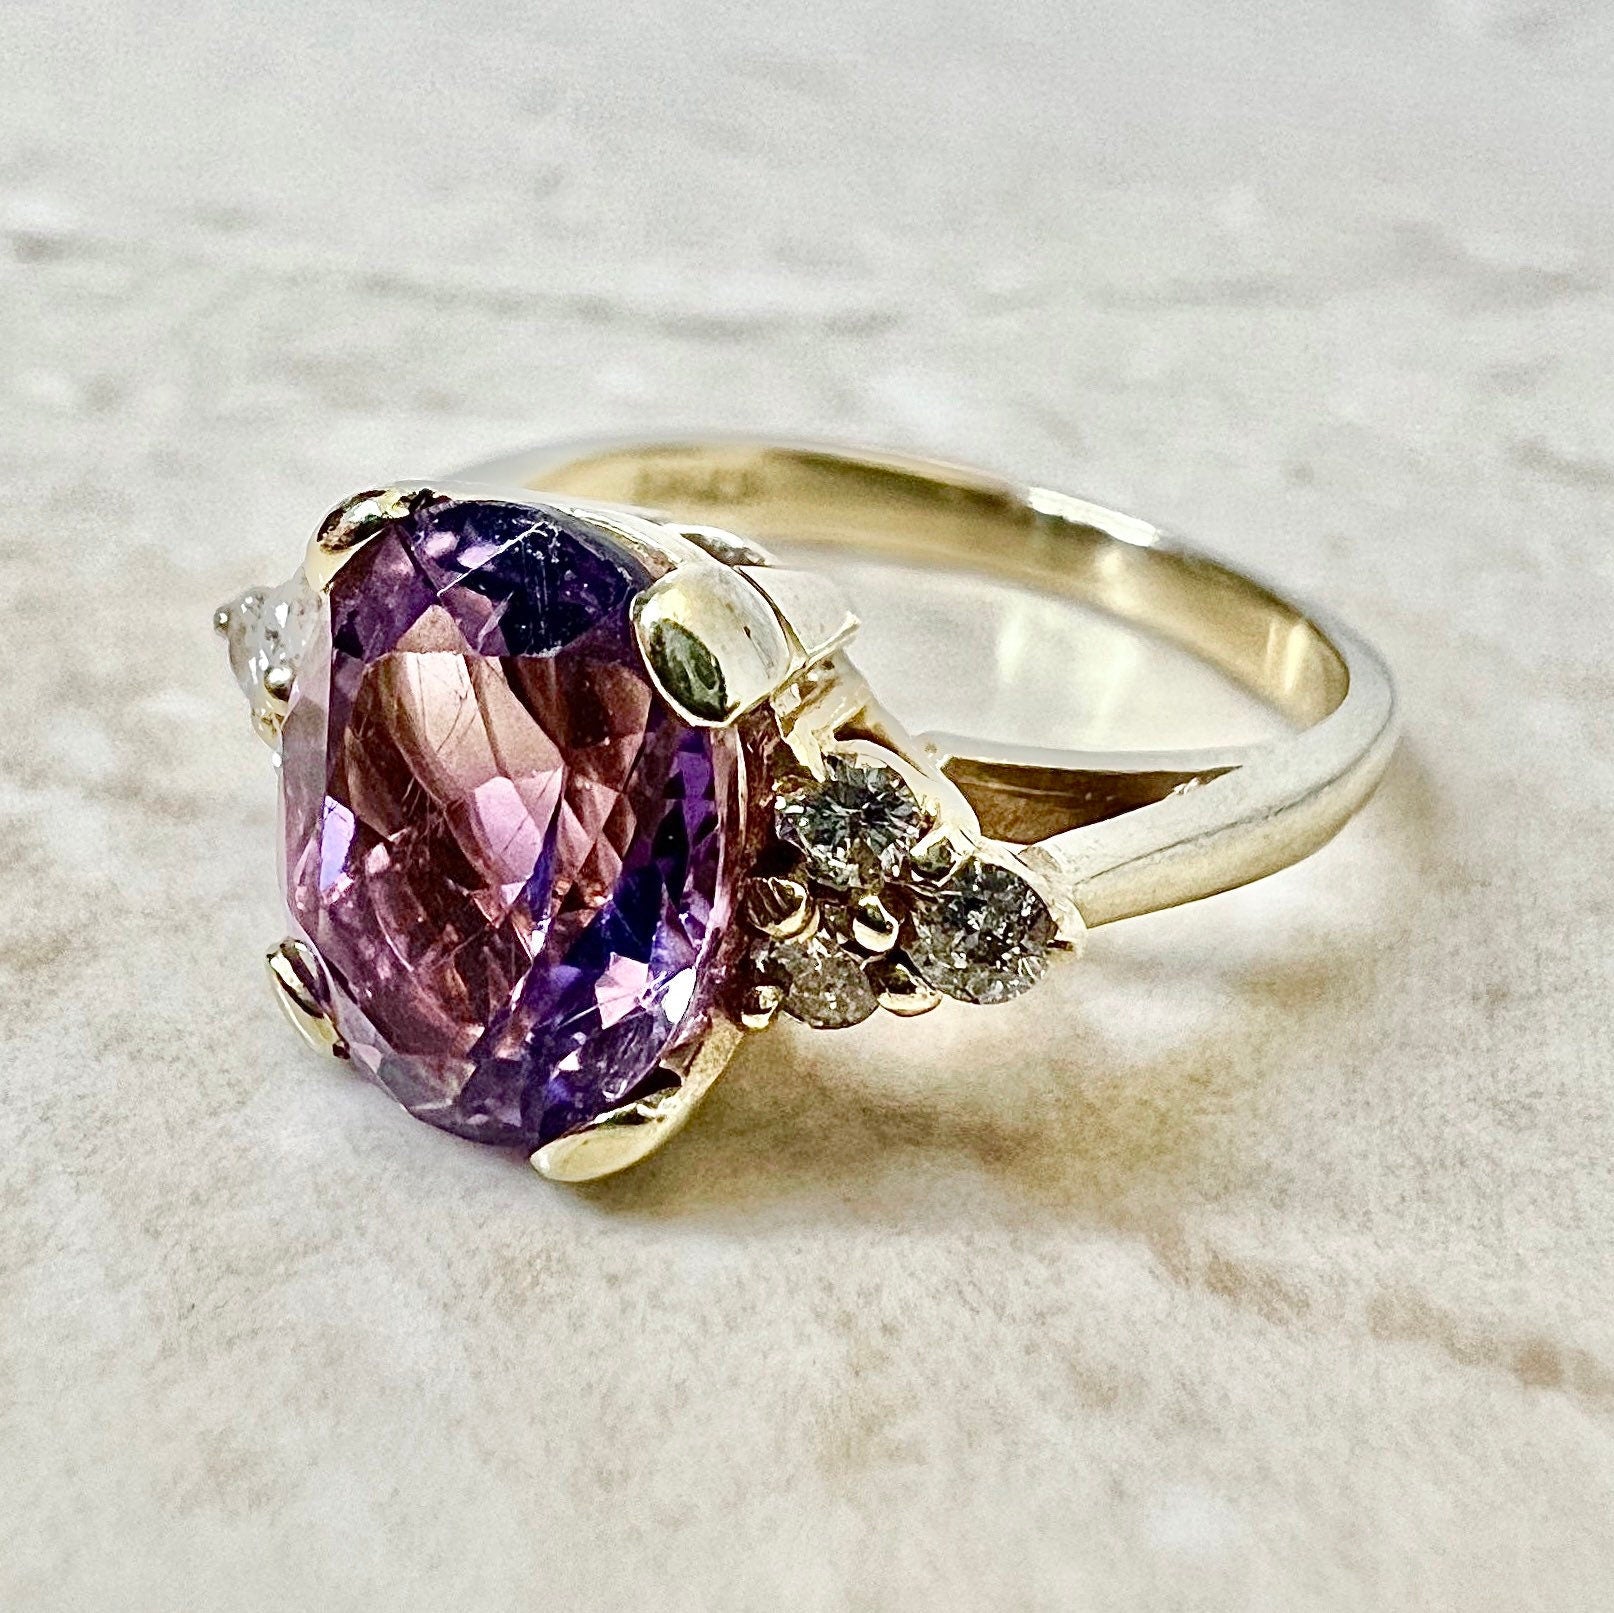 Vintage Heart Shaped Amethyst, Diamond, and 14K Gold Ring